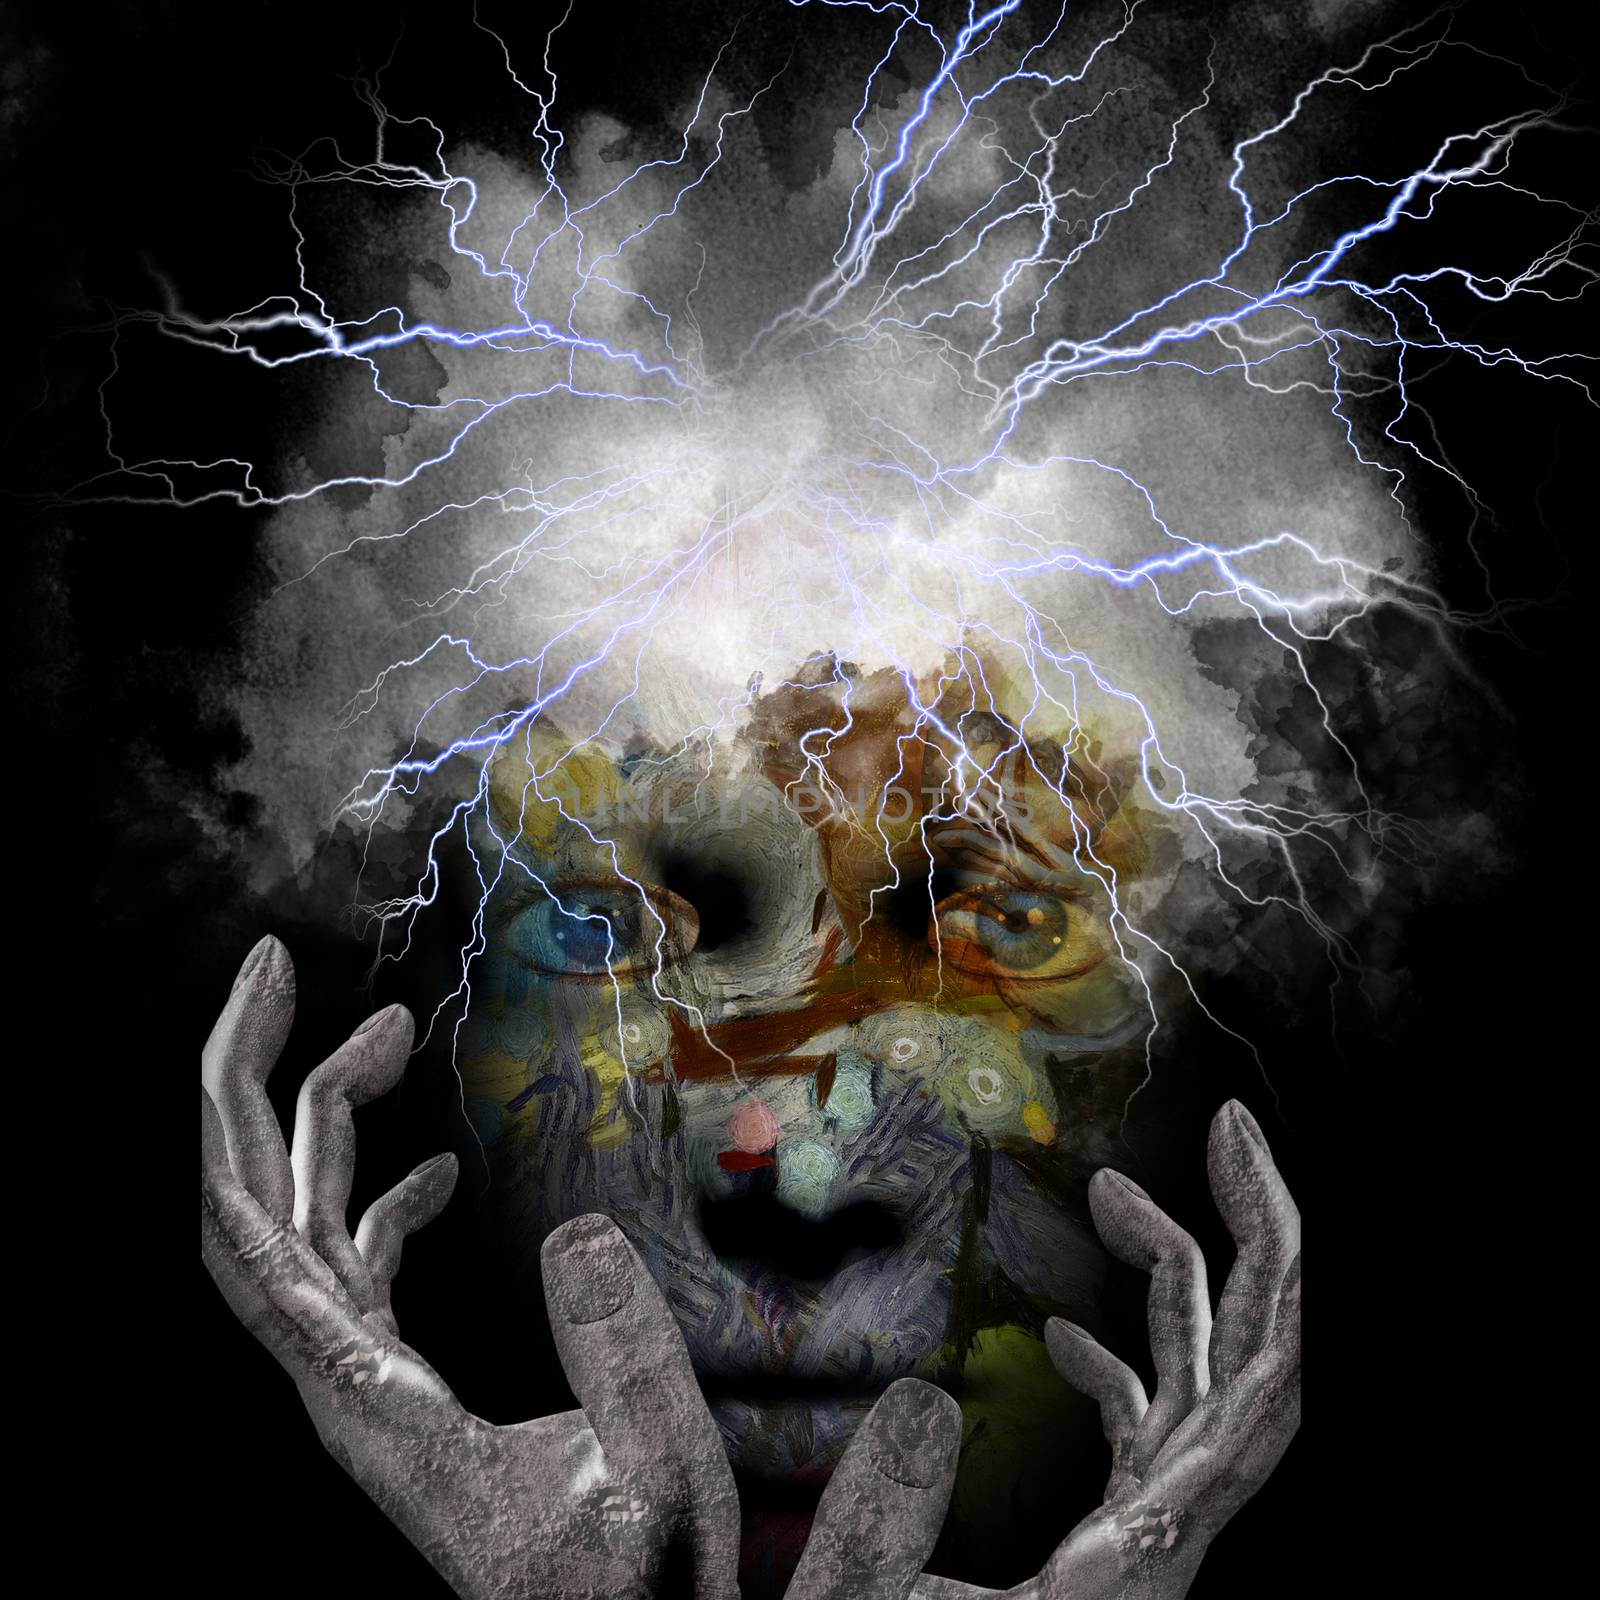 Surreal Face with lightnings and stone hands